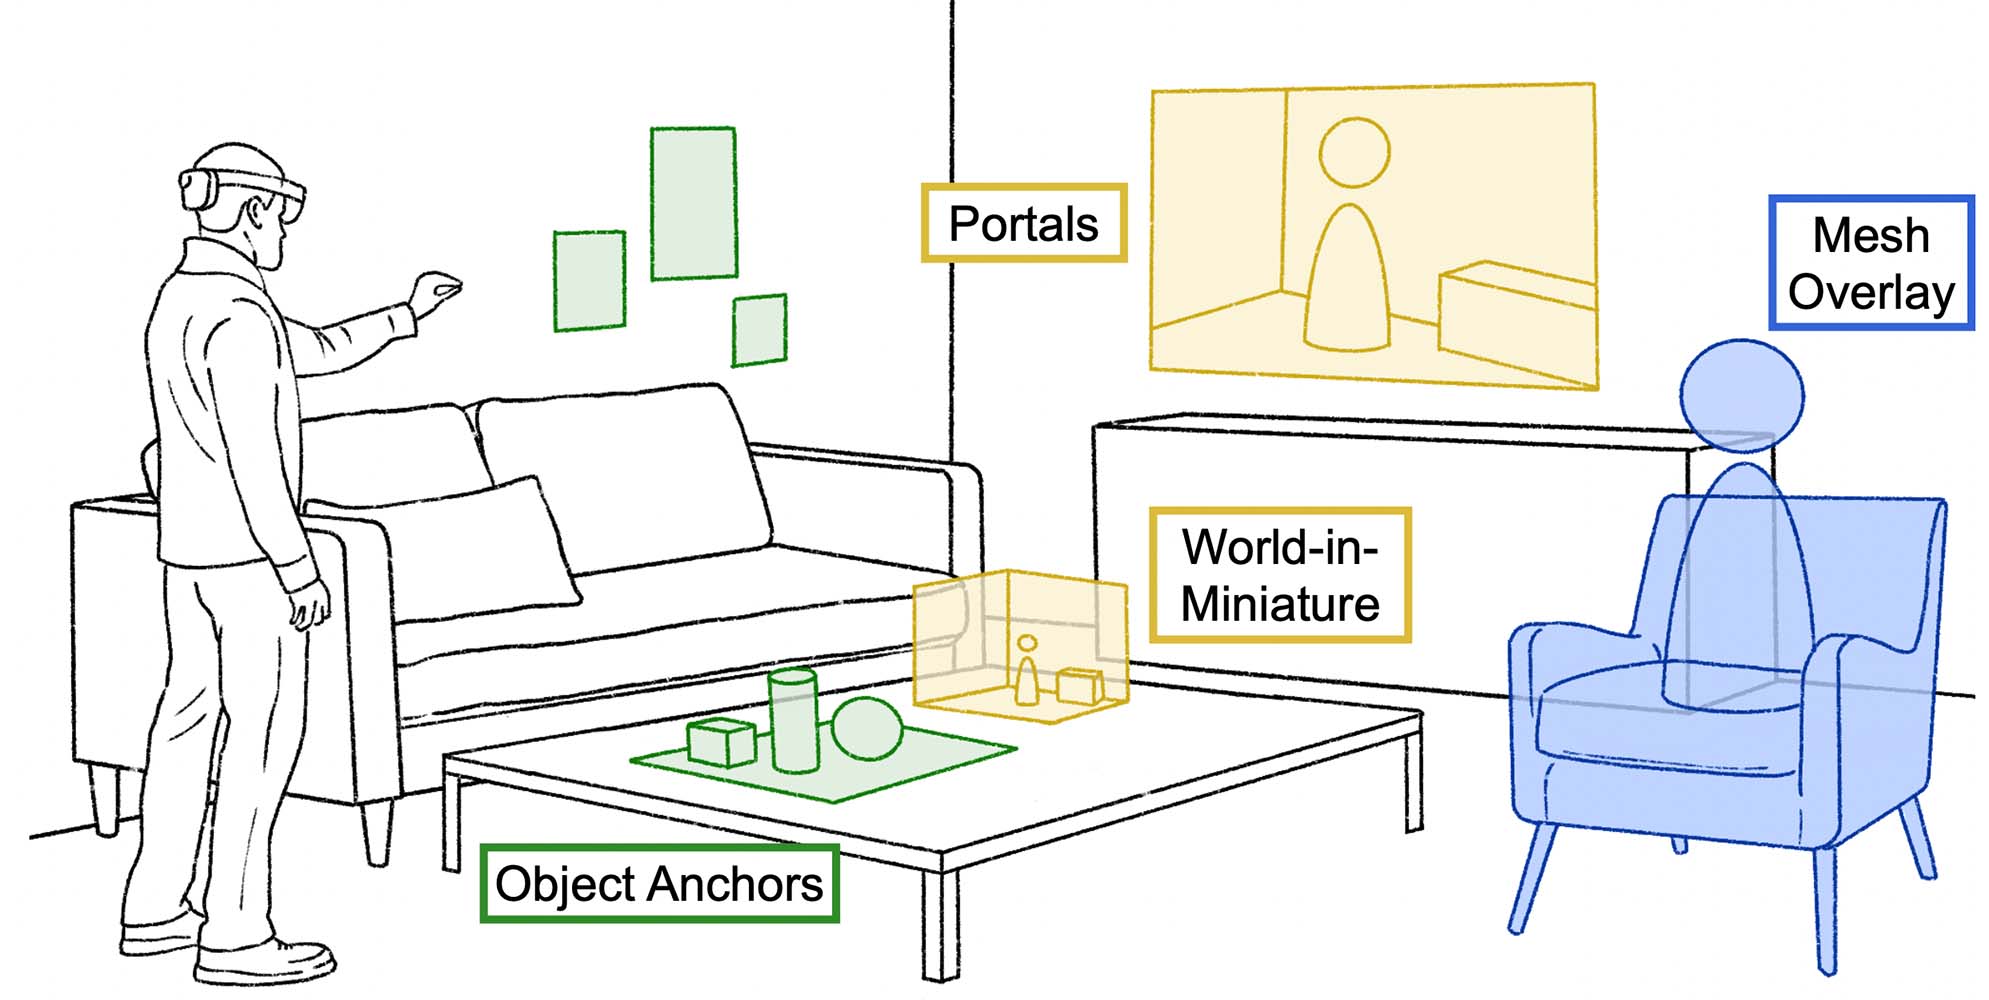 As an overview of XSpace's components, this is a sketch of a person using an AR application in their living room. There is a virtual avatar on a virtual chair, showing the mesh crop and overlay method. There is shared virtual content around the space.